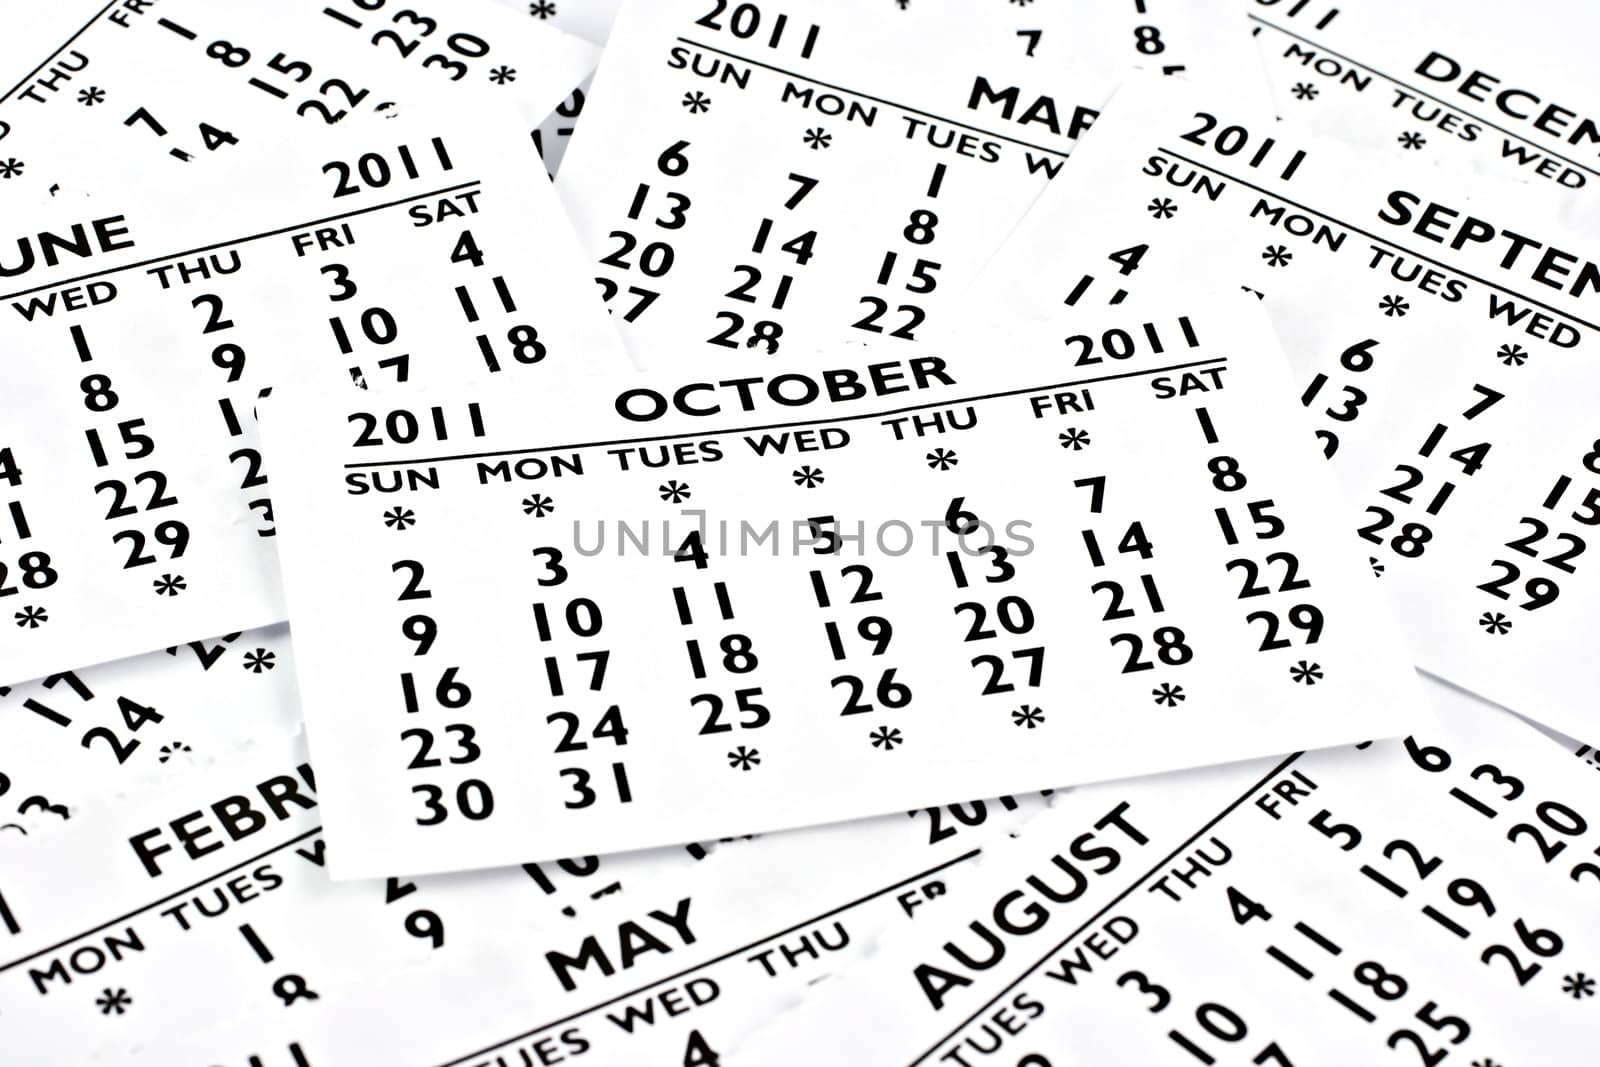 2011 calendar exteriors of the page. Month of October, the site is at the very top.